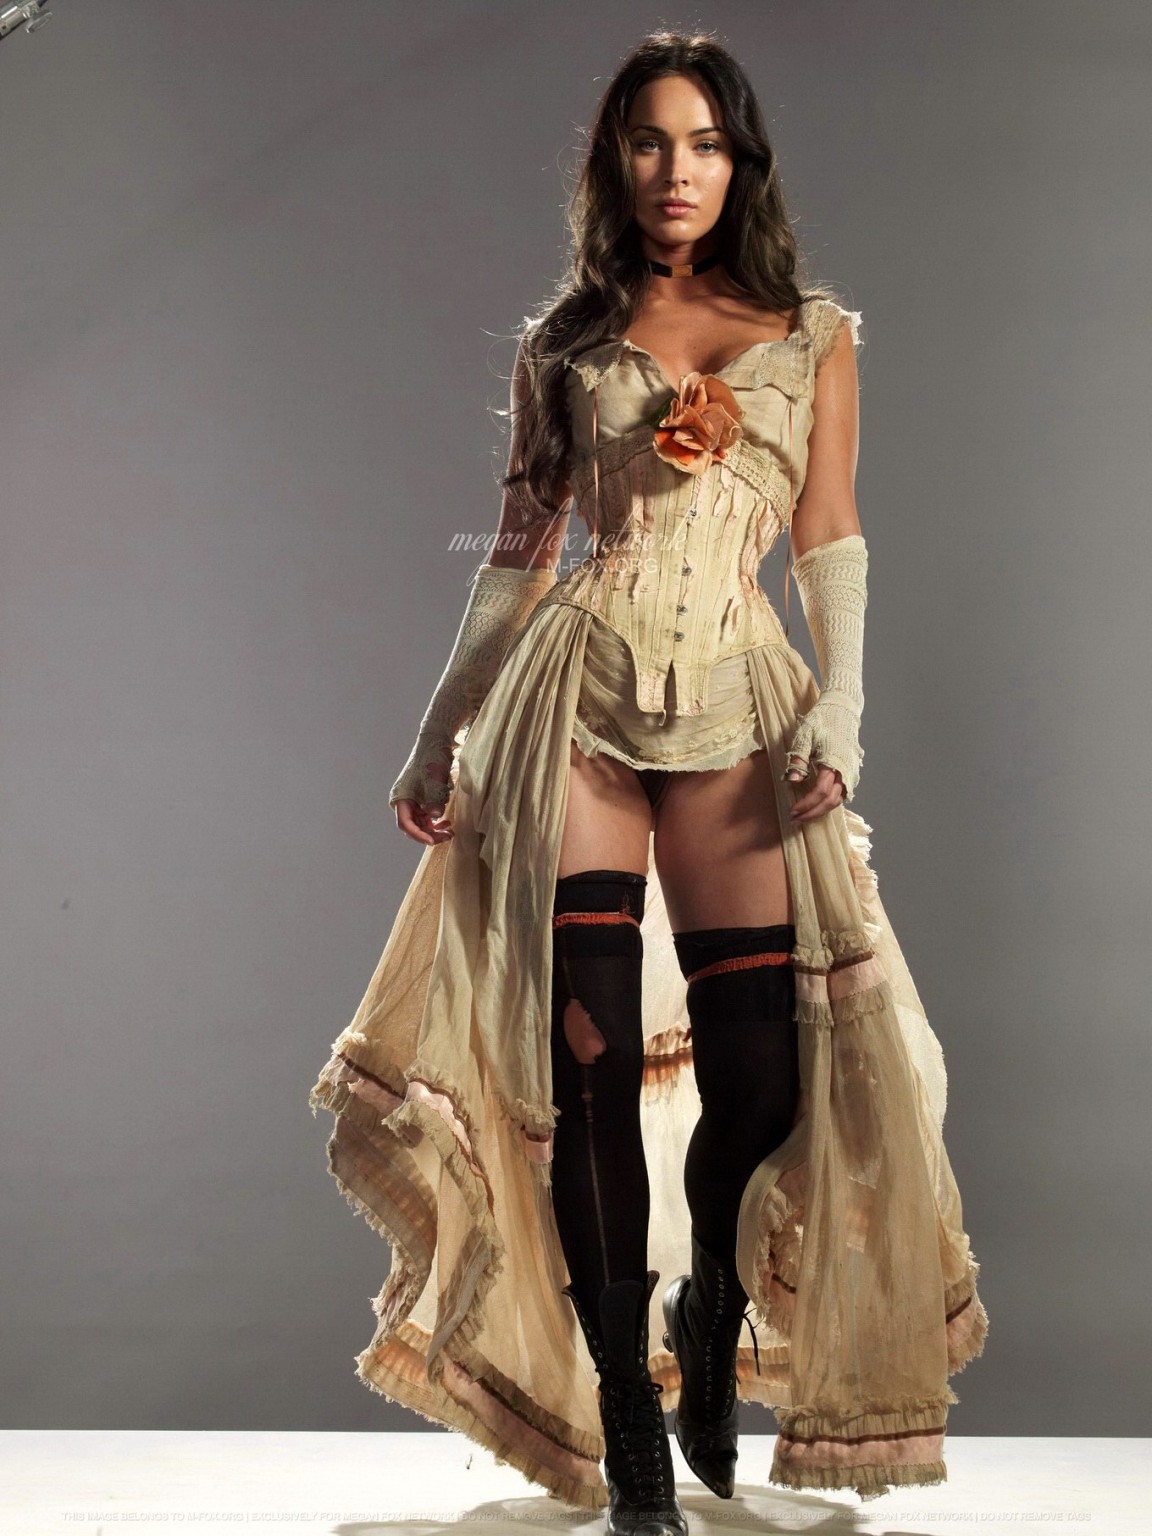 Megan Fox showing off her pussy  cleavage in Jonah Hex promos #75215529